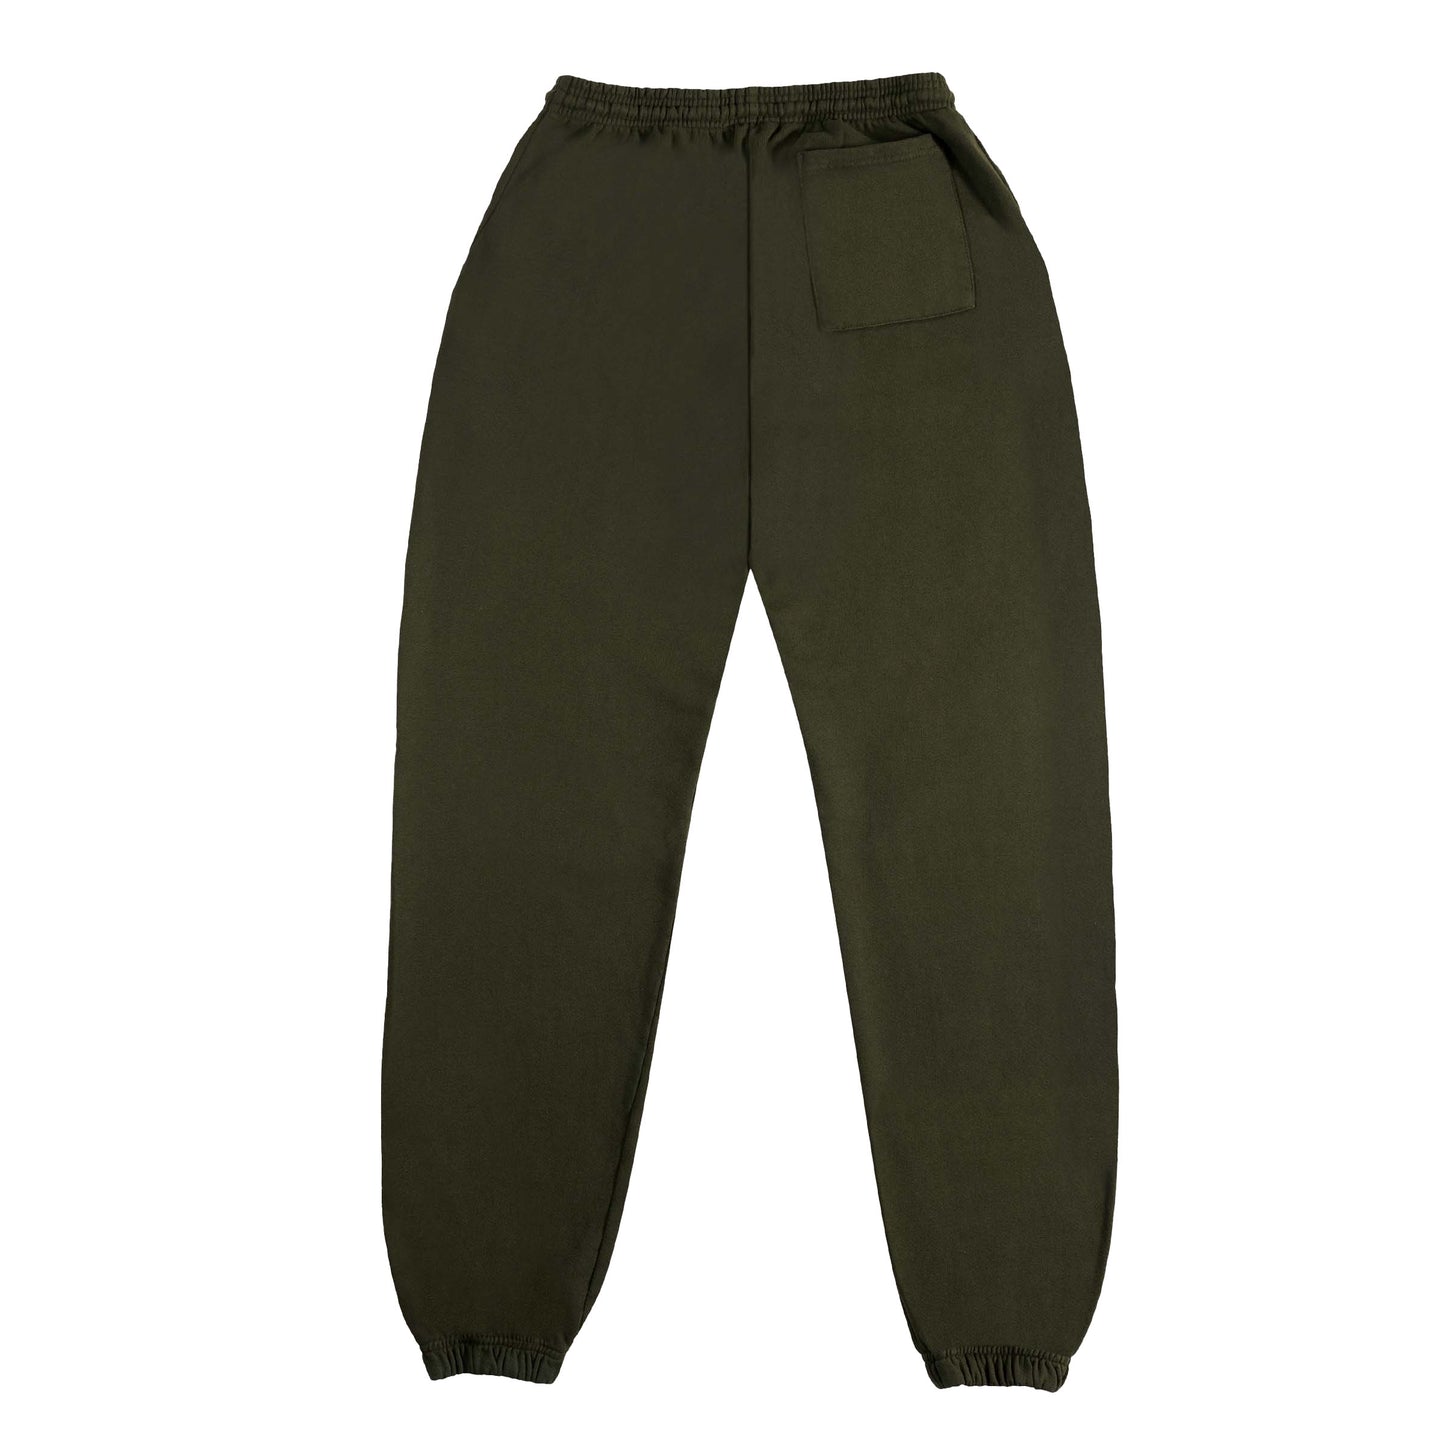 BACK VIEW OF UNIVERSAL PURSUIT JOGGERS BY HER KAI & I IN MOUNTAIN GREEN